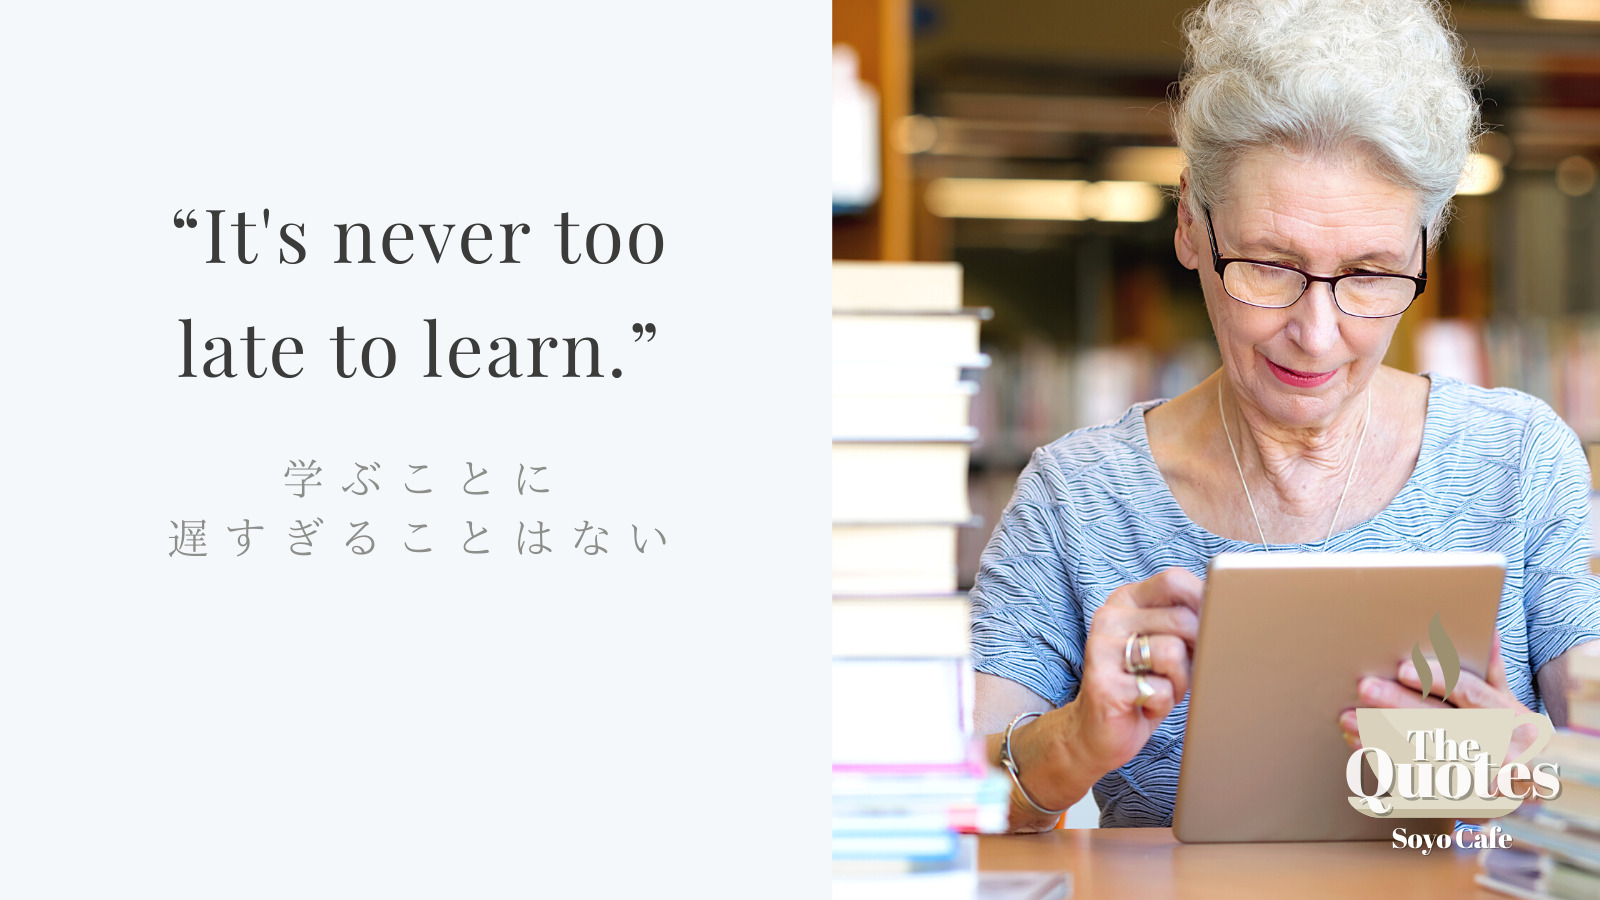 It's never too late to learn.